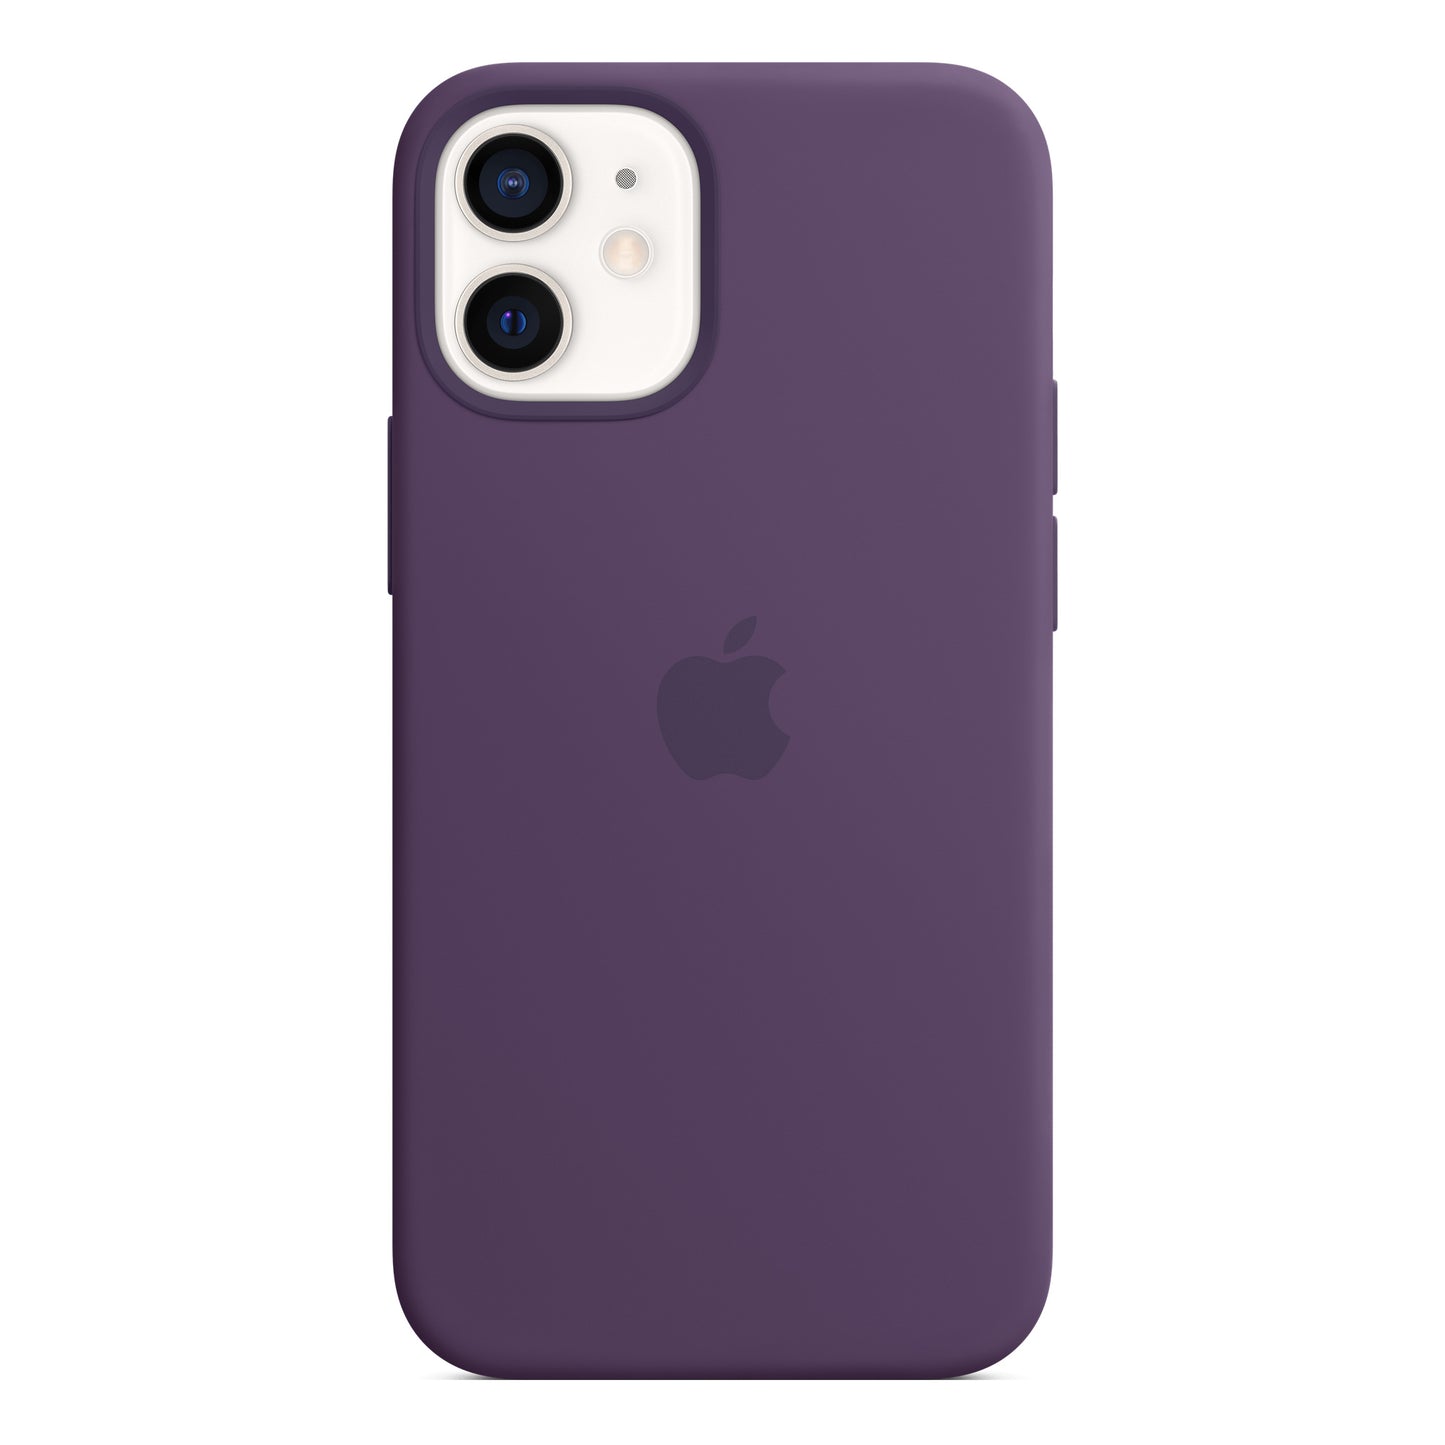 iPhone 12 mini Silicone Case with MagSafe - Amethyst